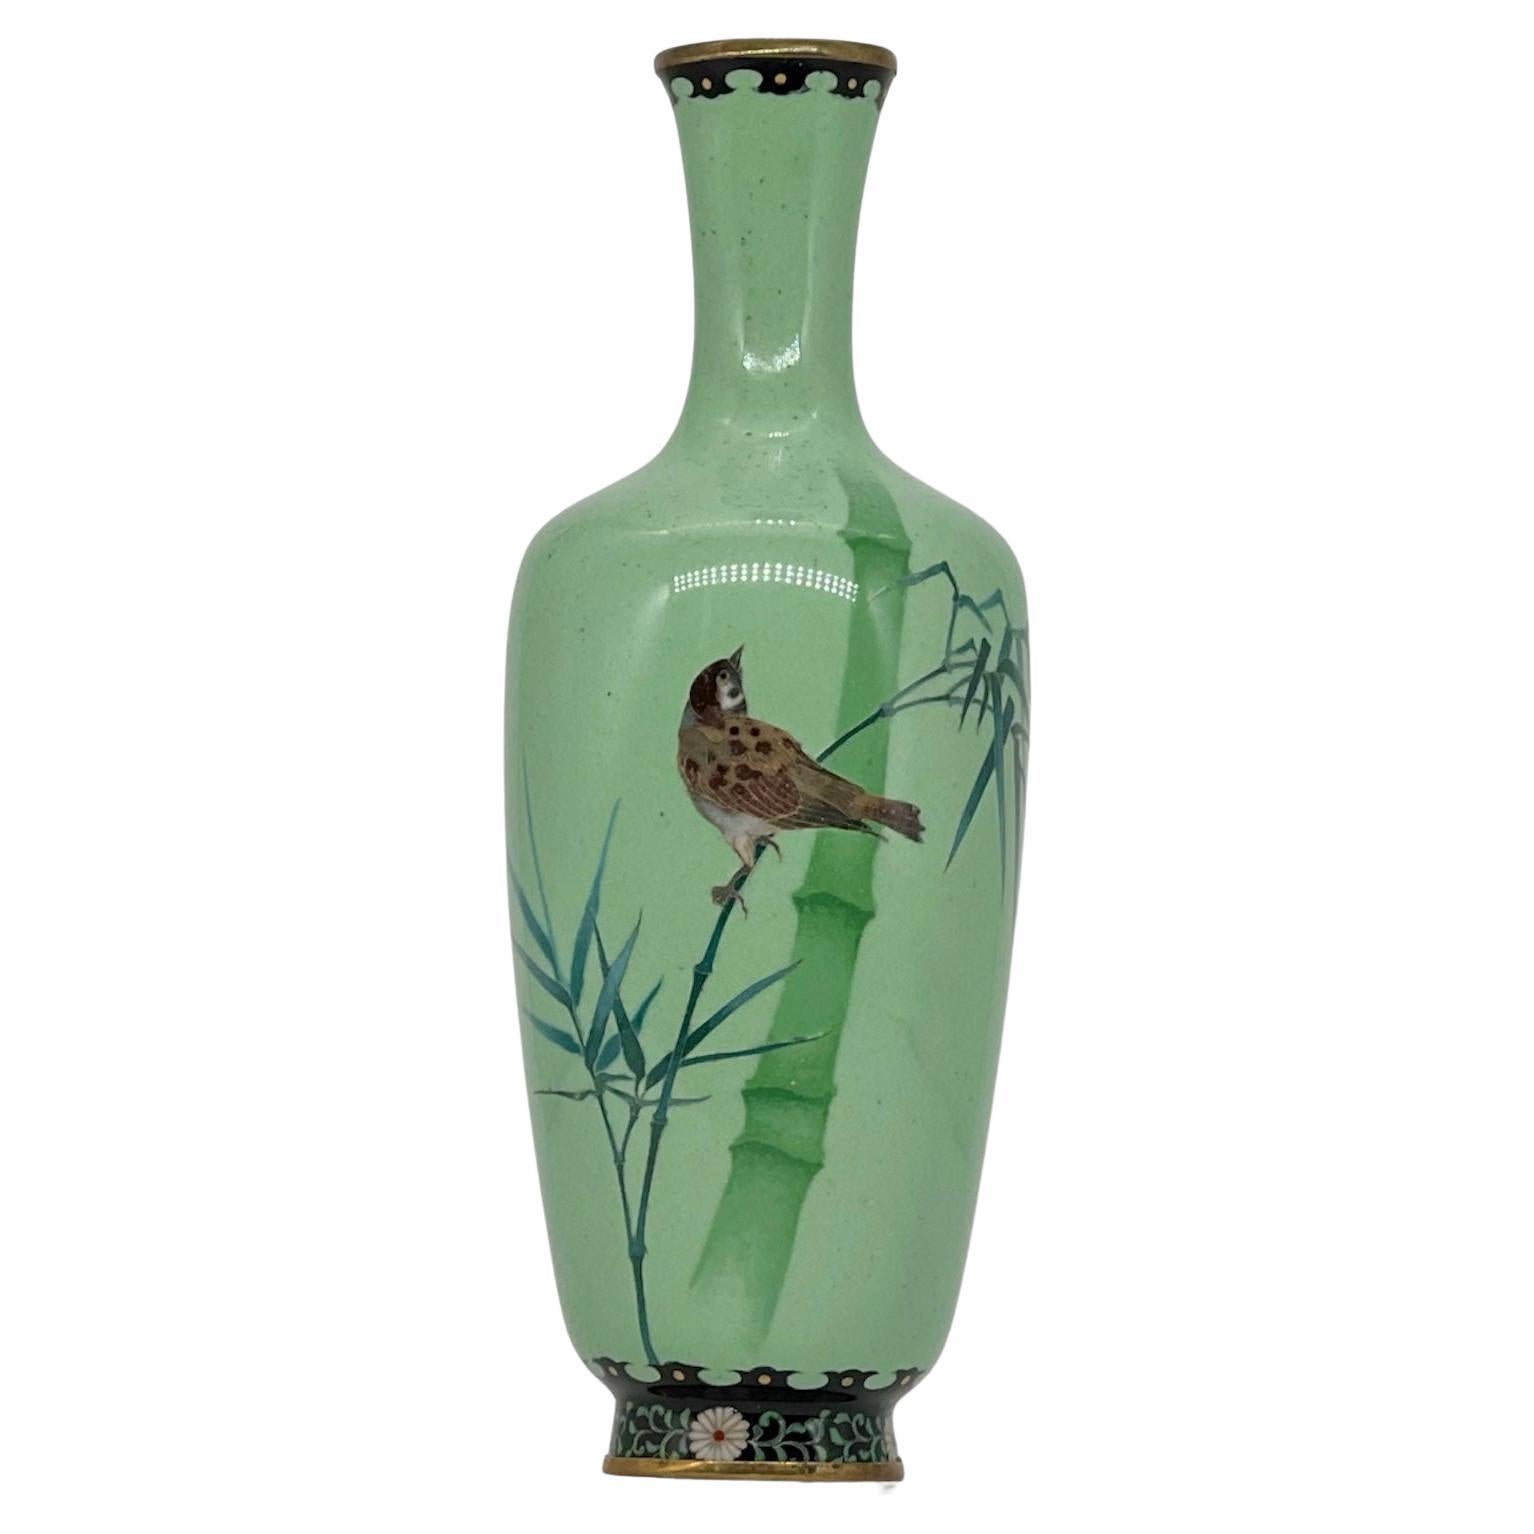 A Fine Japanese Cloisonne Enamel Wire & Wireless Vase attributed to Ando.